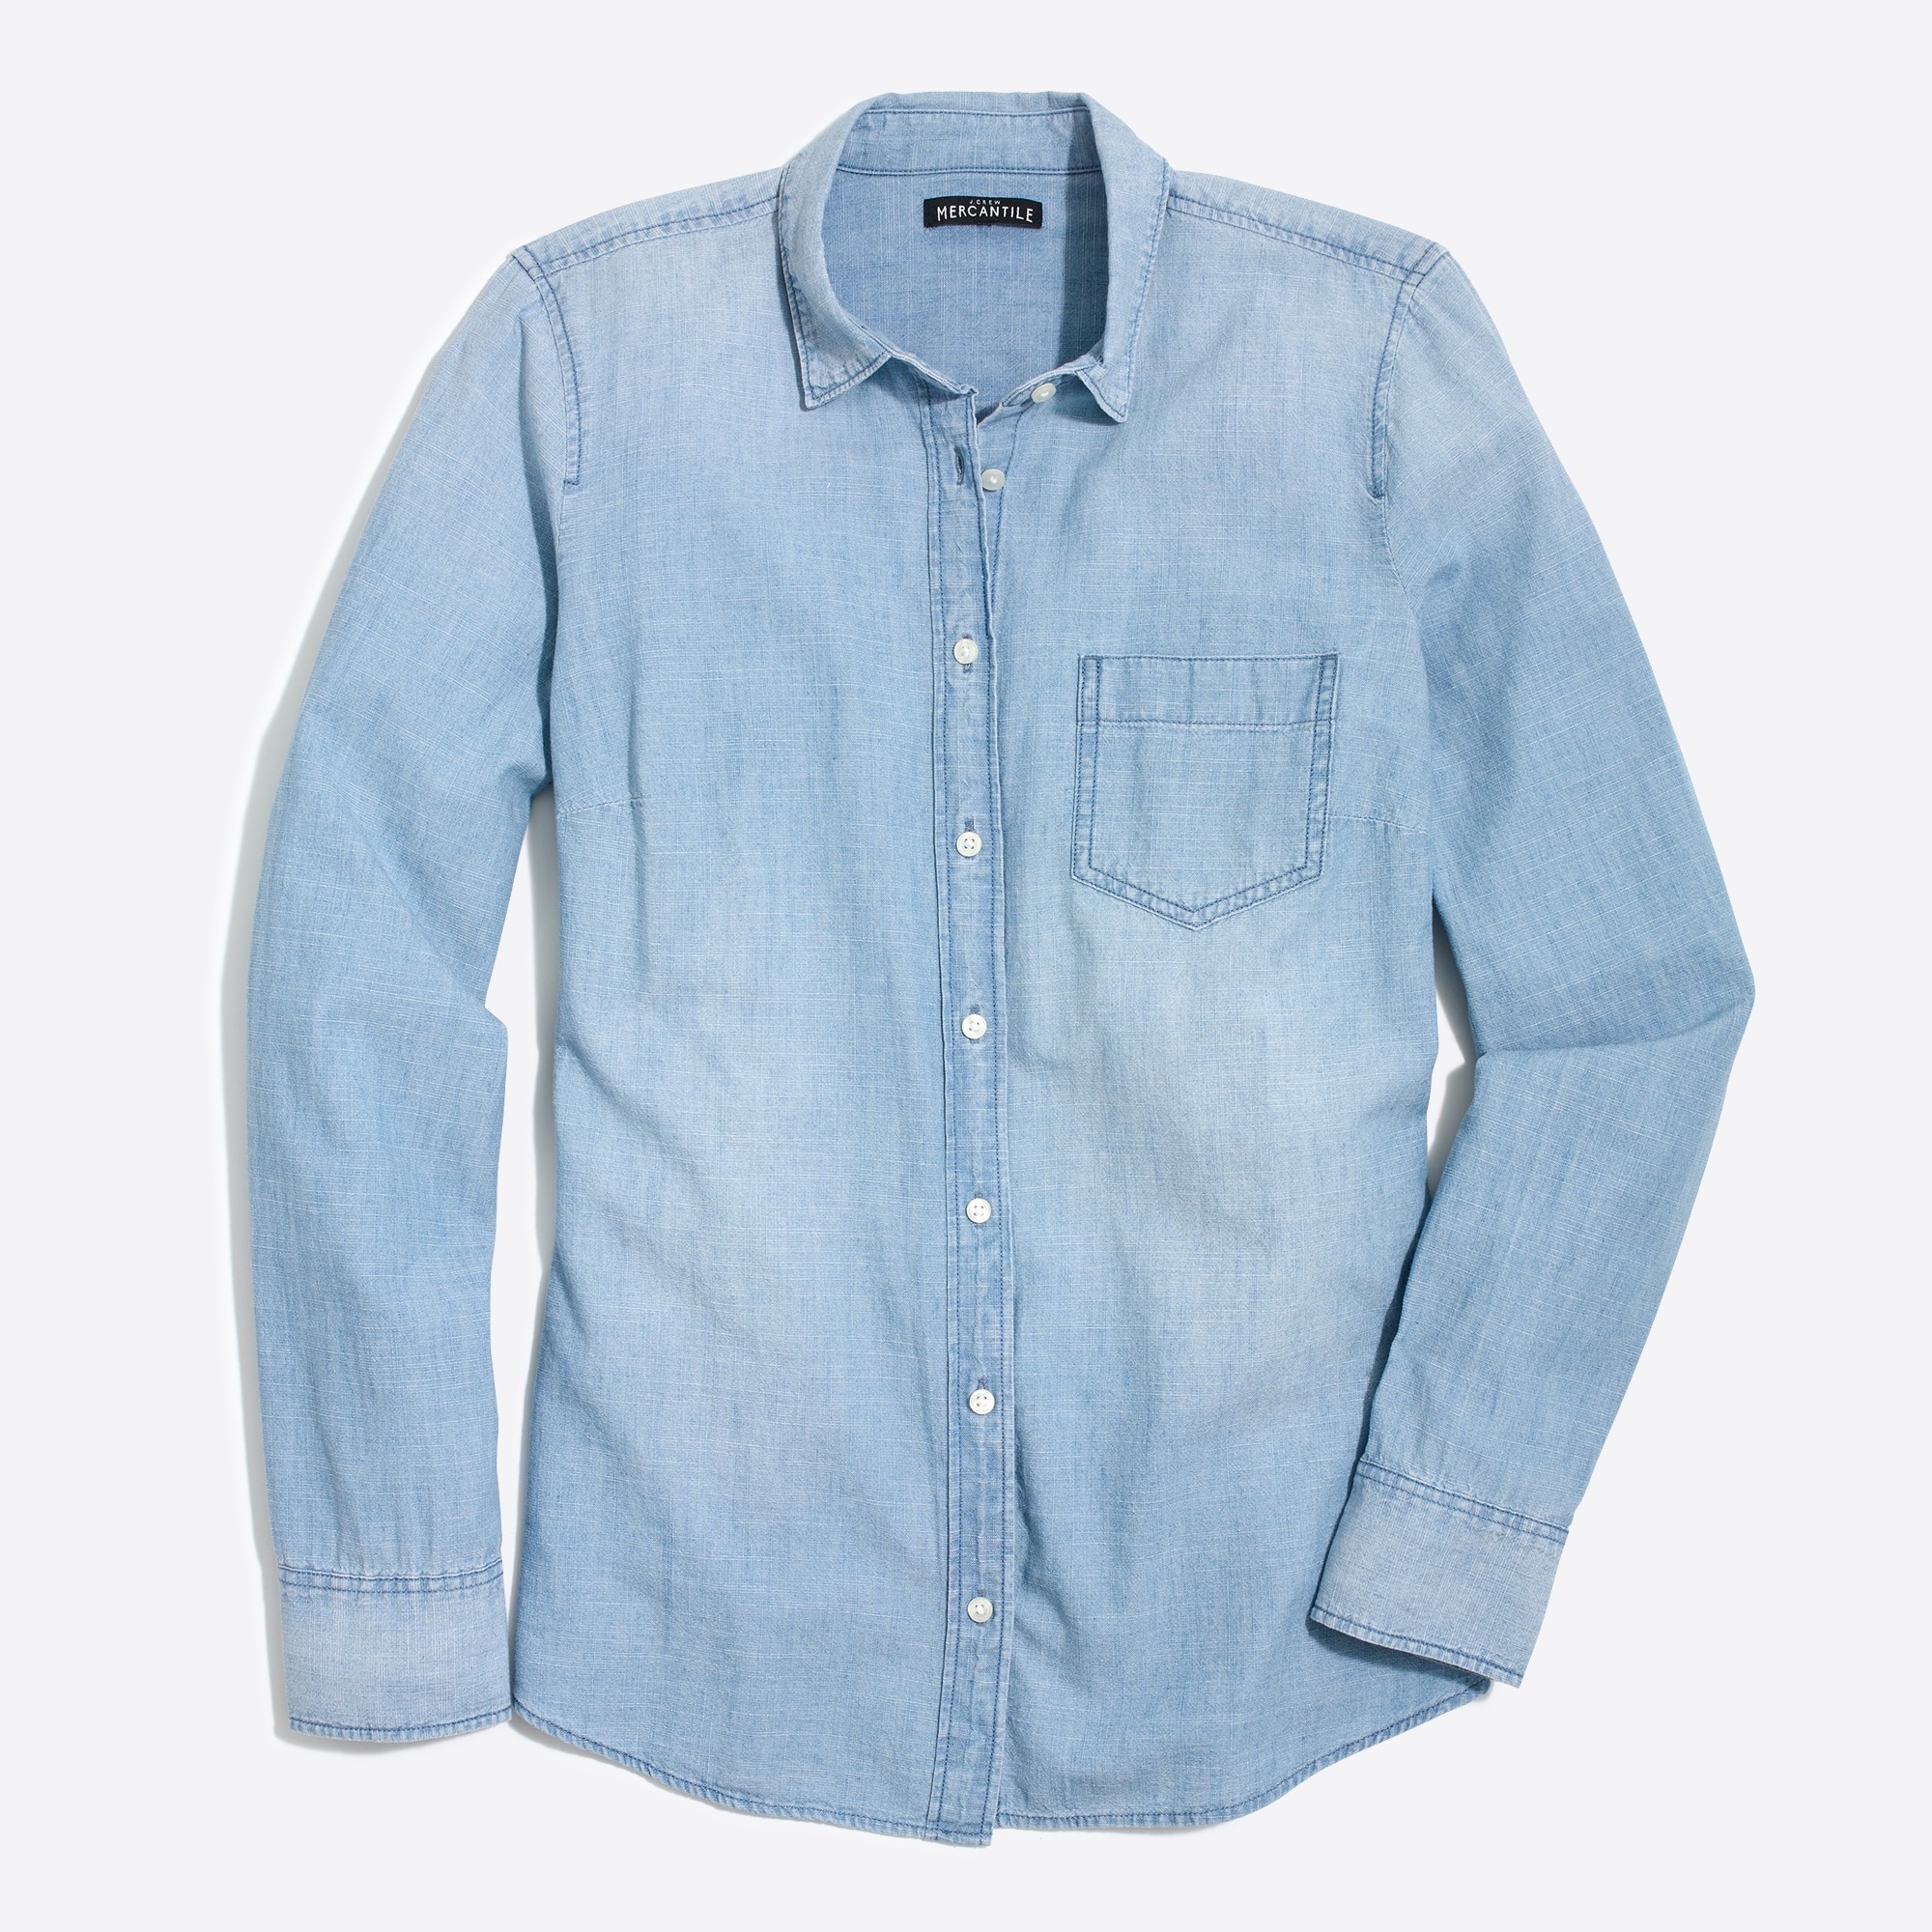  Chambray shirt in signature fit